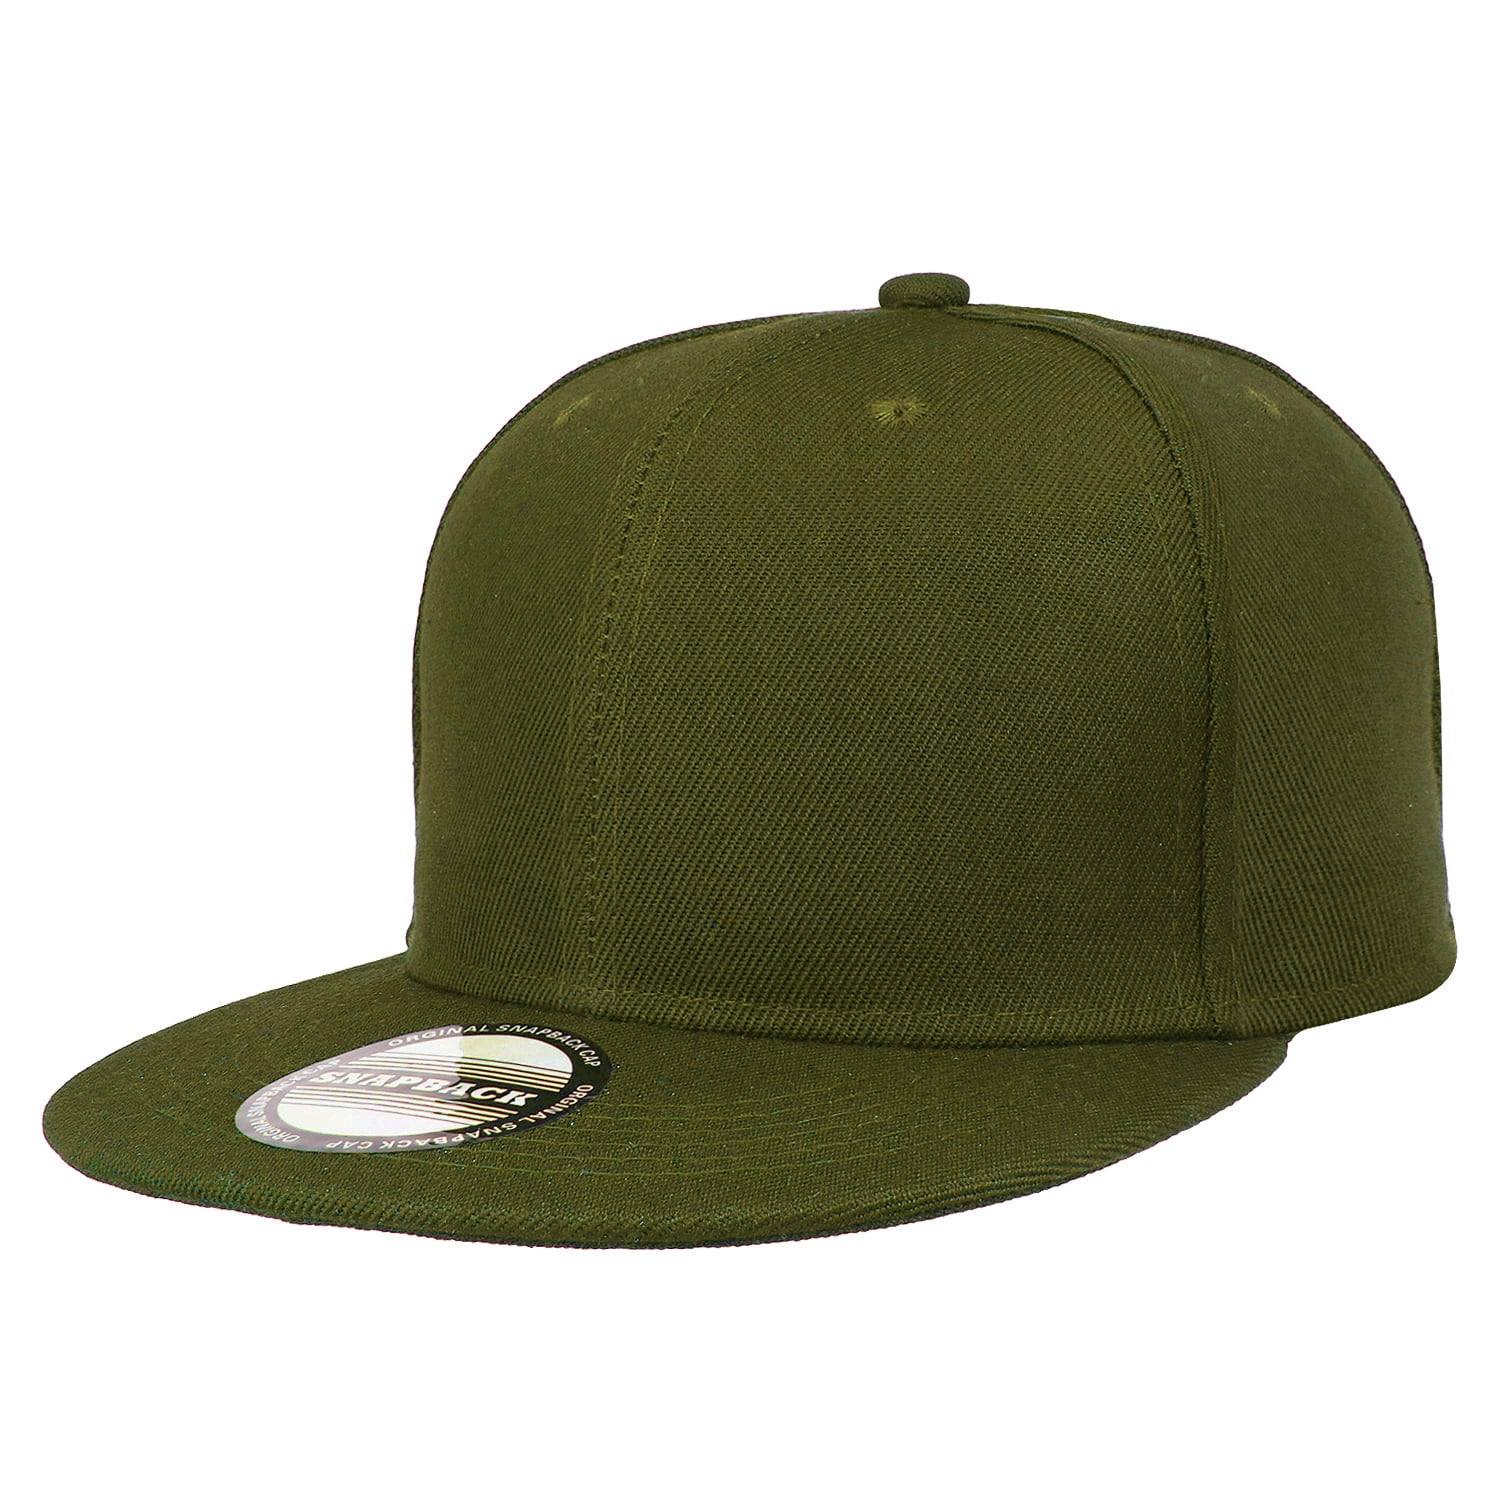 Classic Snapback Hat Cap Hip Hop Style Flat Bill Blank Solid Color Adjustable Size Army Green